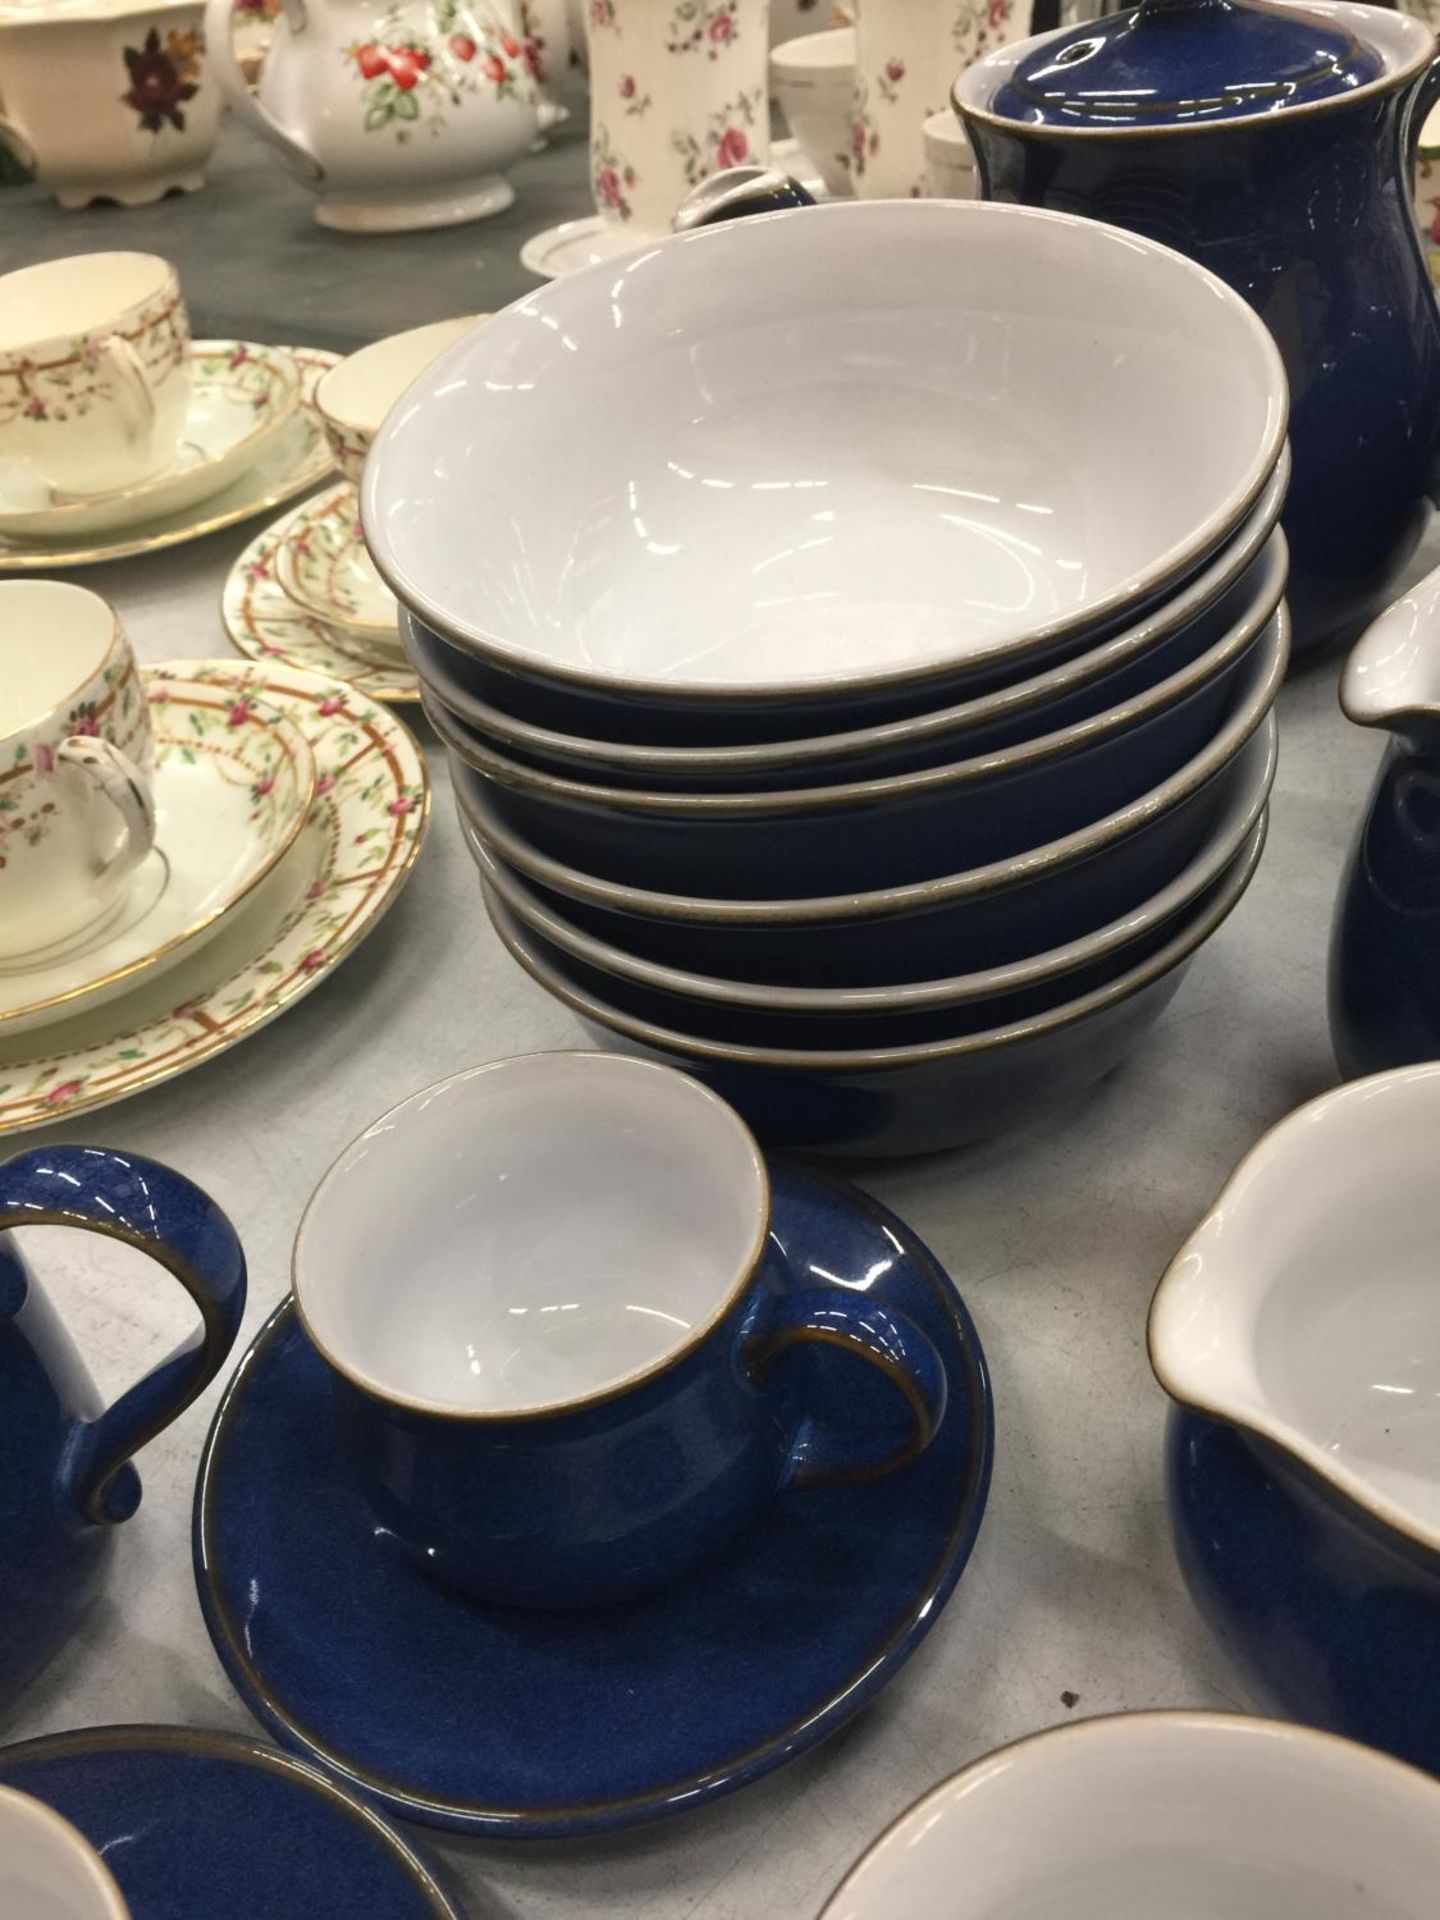 A DENBY DINNER SERVICE IN BLUE TO INCLUDE PLATES, BOWLS, TEAPOTS, SERVING TUREEN, MILK JUGS, SUGAR - Image 5 of 9